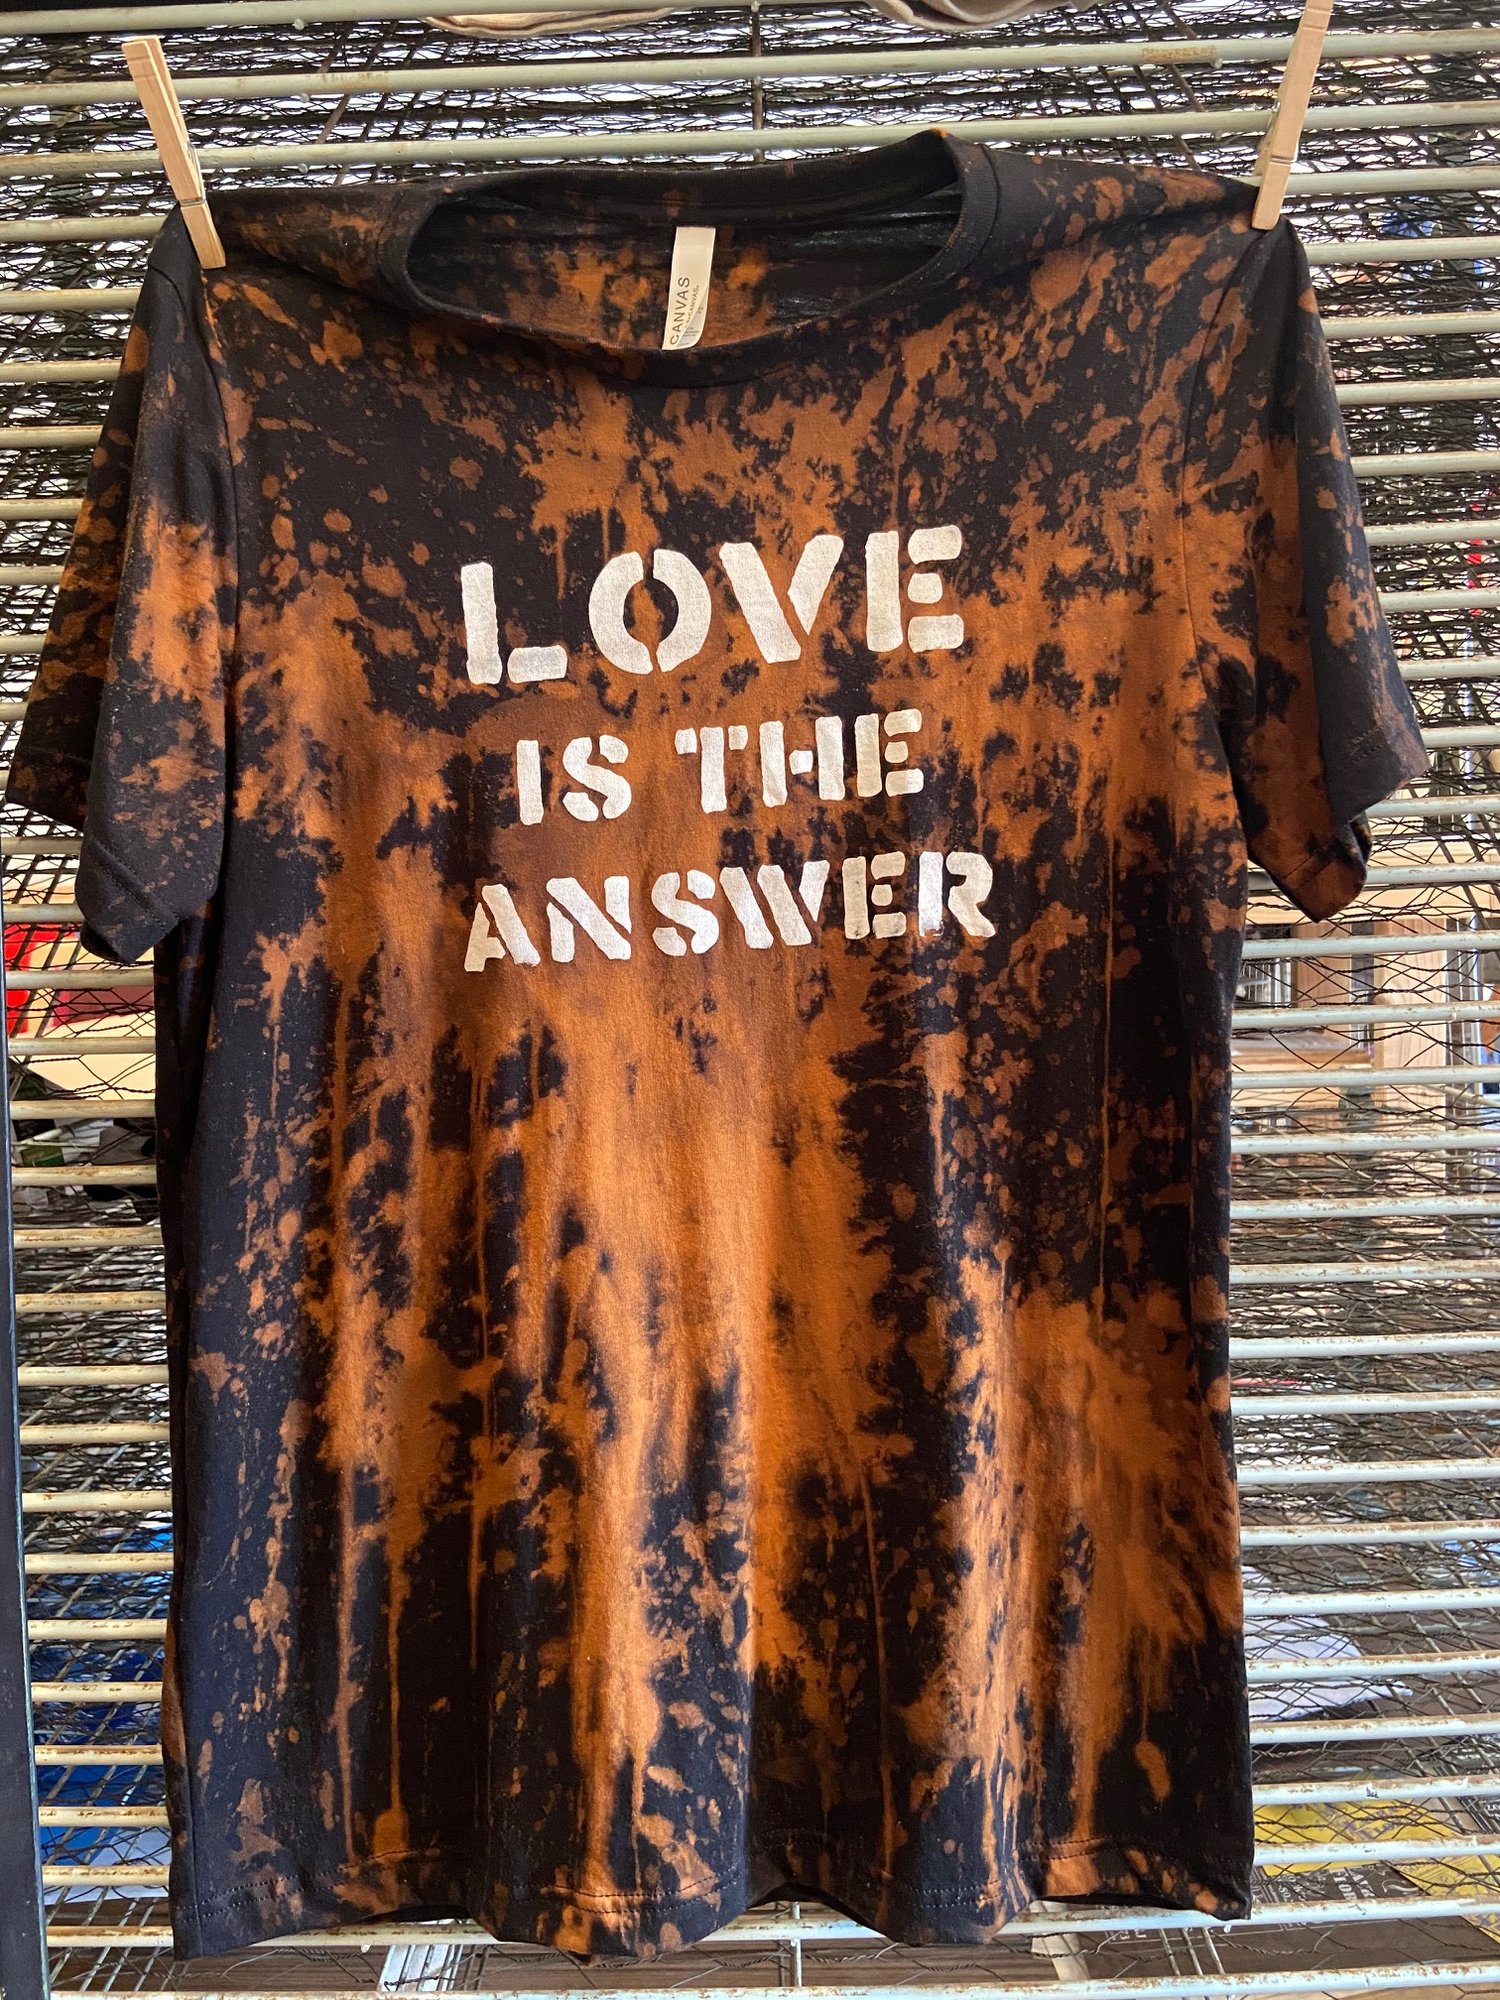 LOVE IS THE ANSWER Bleached out!